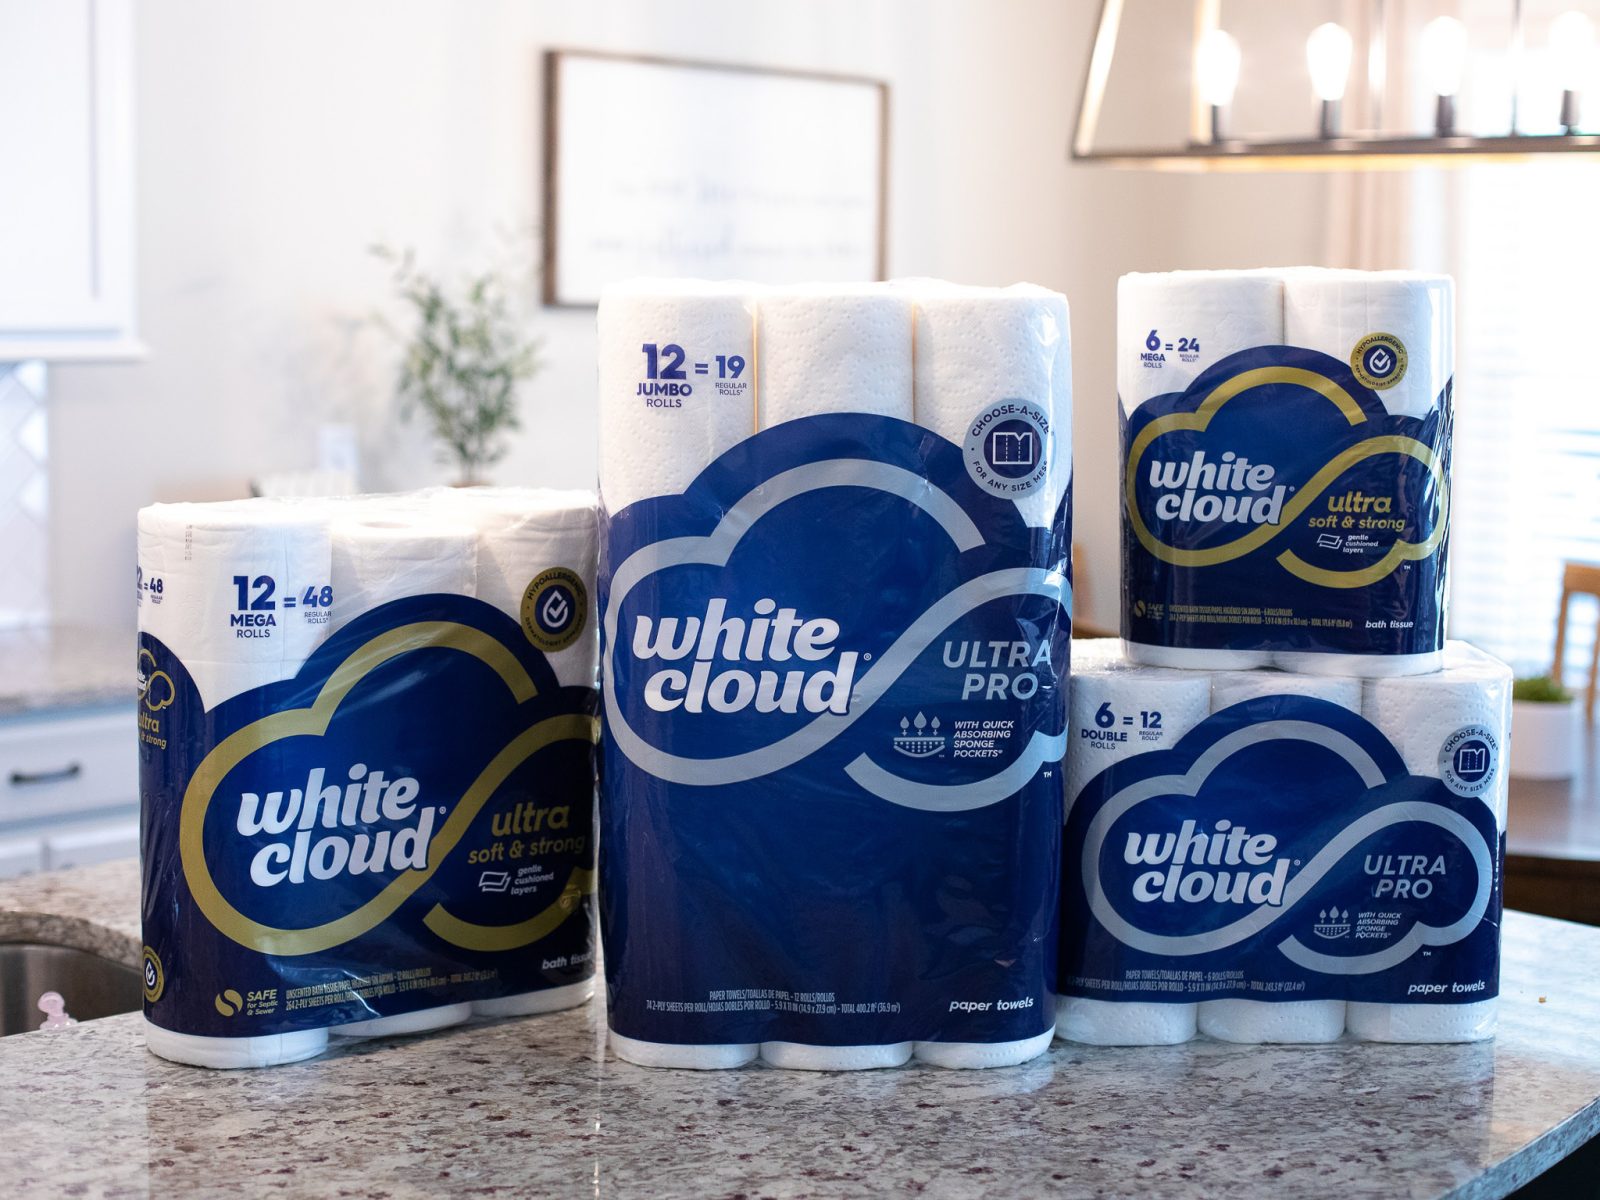 Try White Cloud® Toilet Paper and Paper Towels & Get Premium Quality Paper Products You Can Trust – Save At Publix!